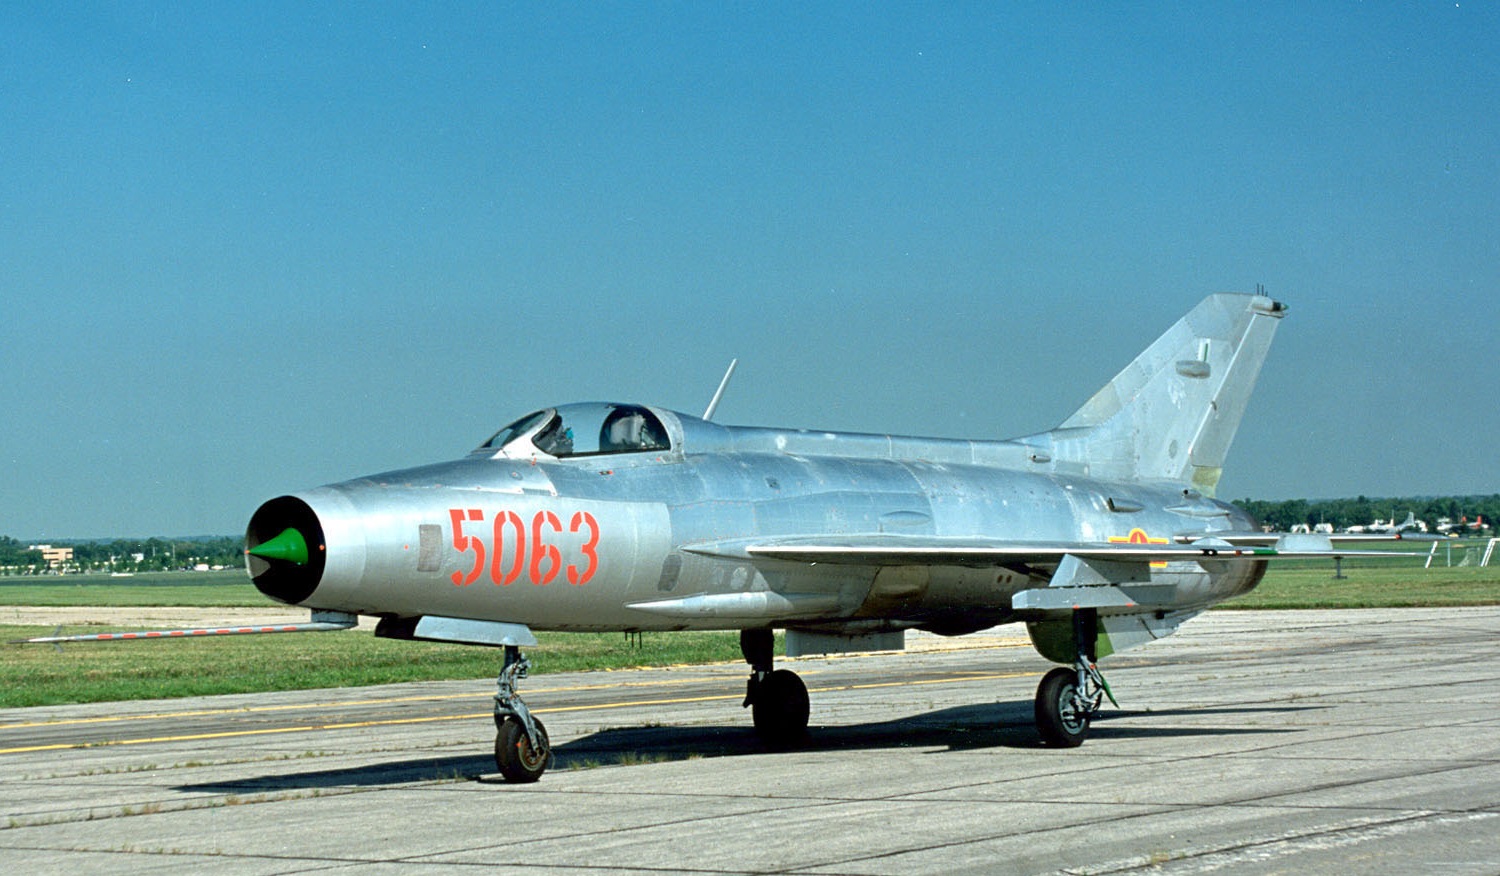 A Mikoyan Gurevich MiG-21PF at the National Museum of the United States Air Force.